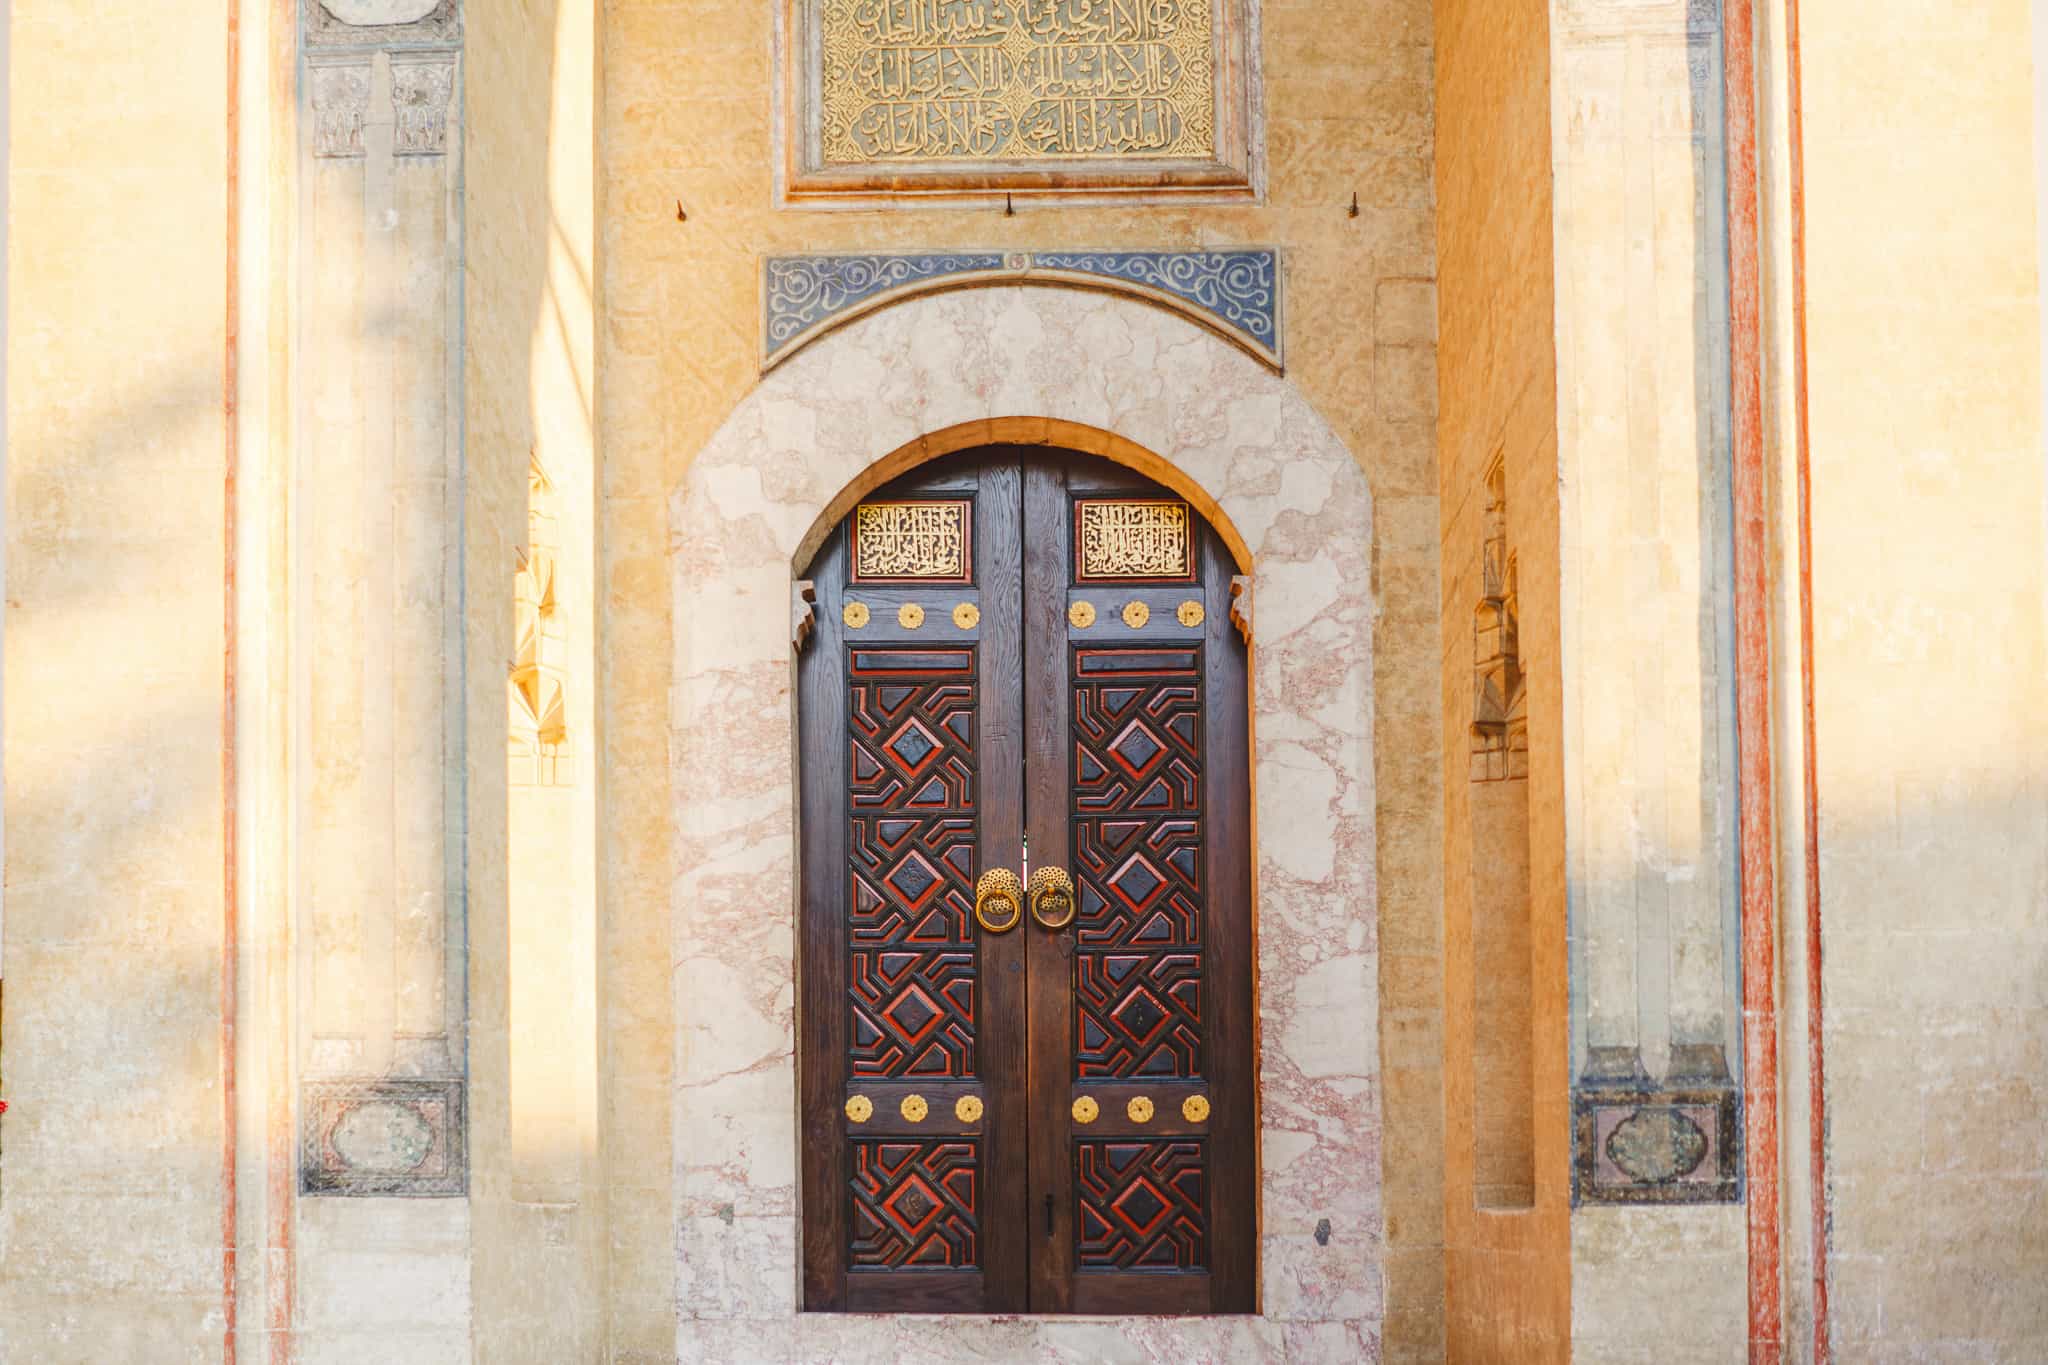 An old ornate wooden door with gold handles in the old city of Sarajevo Bosnia and Herzegovina